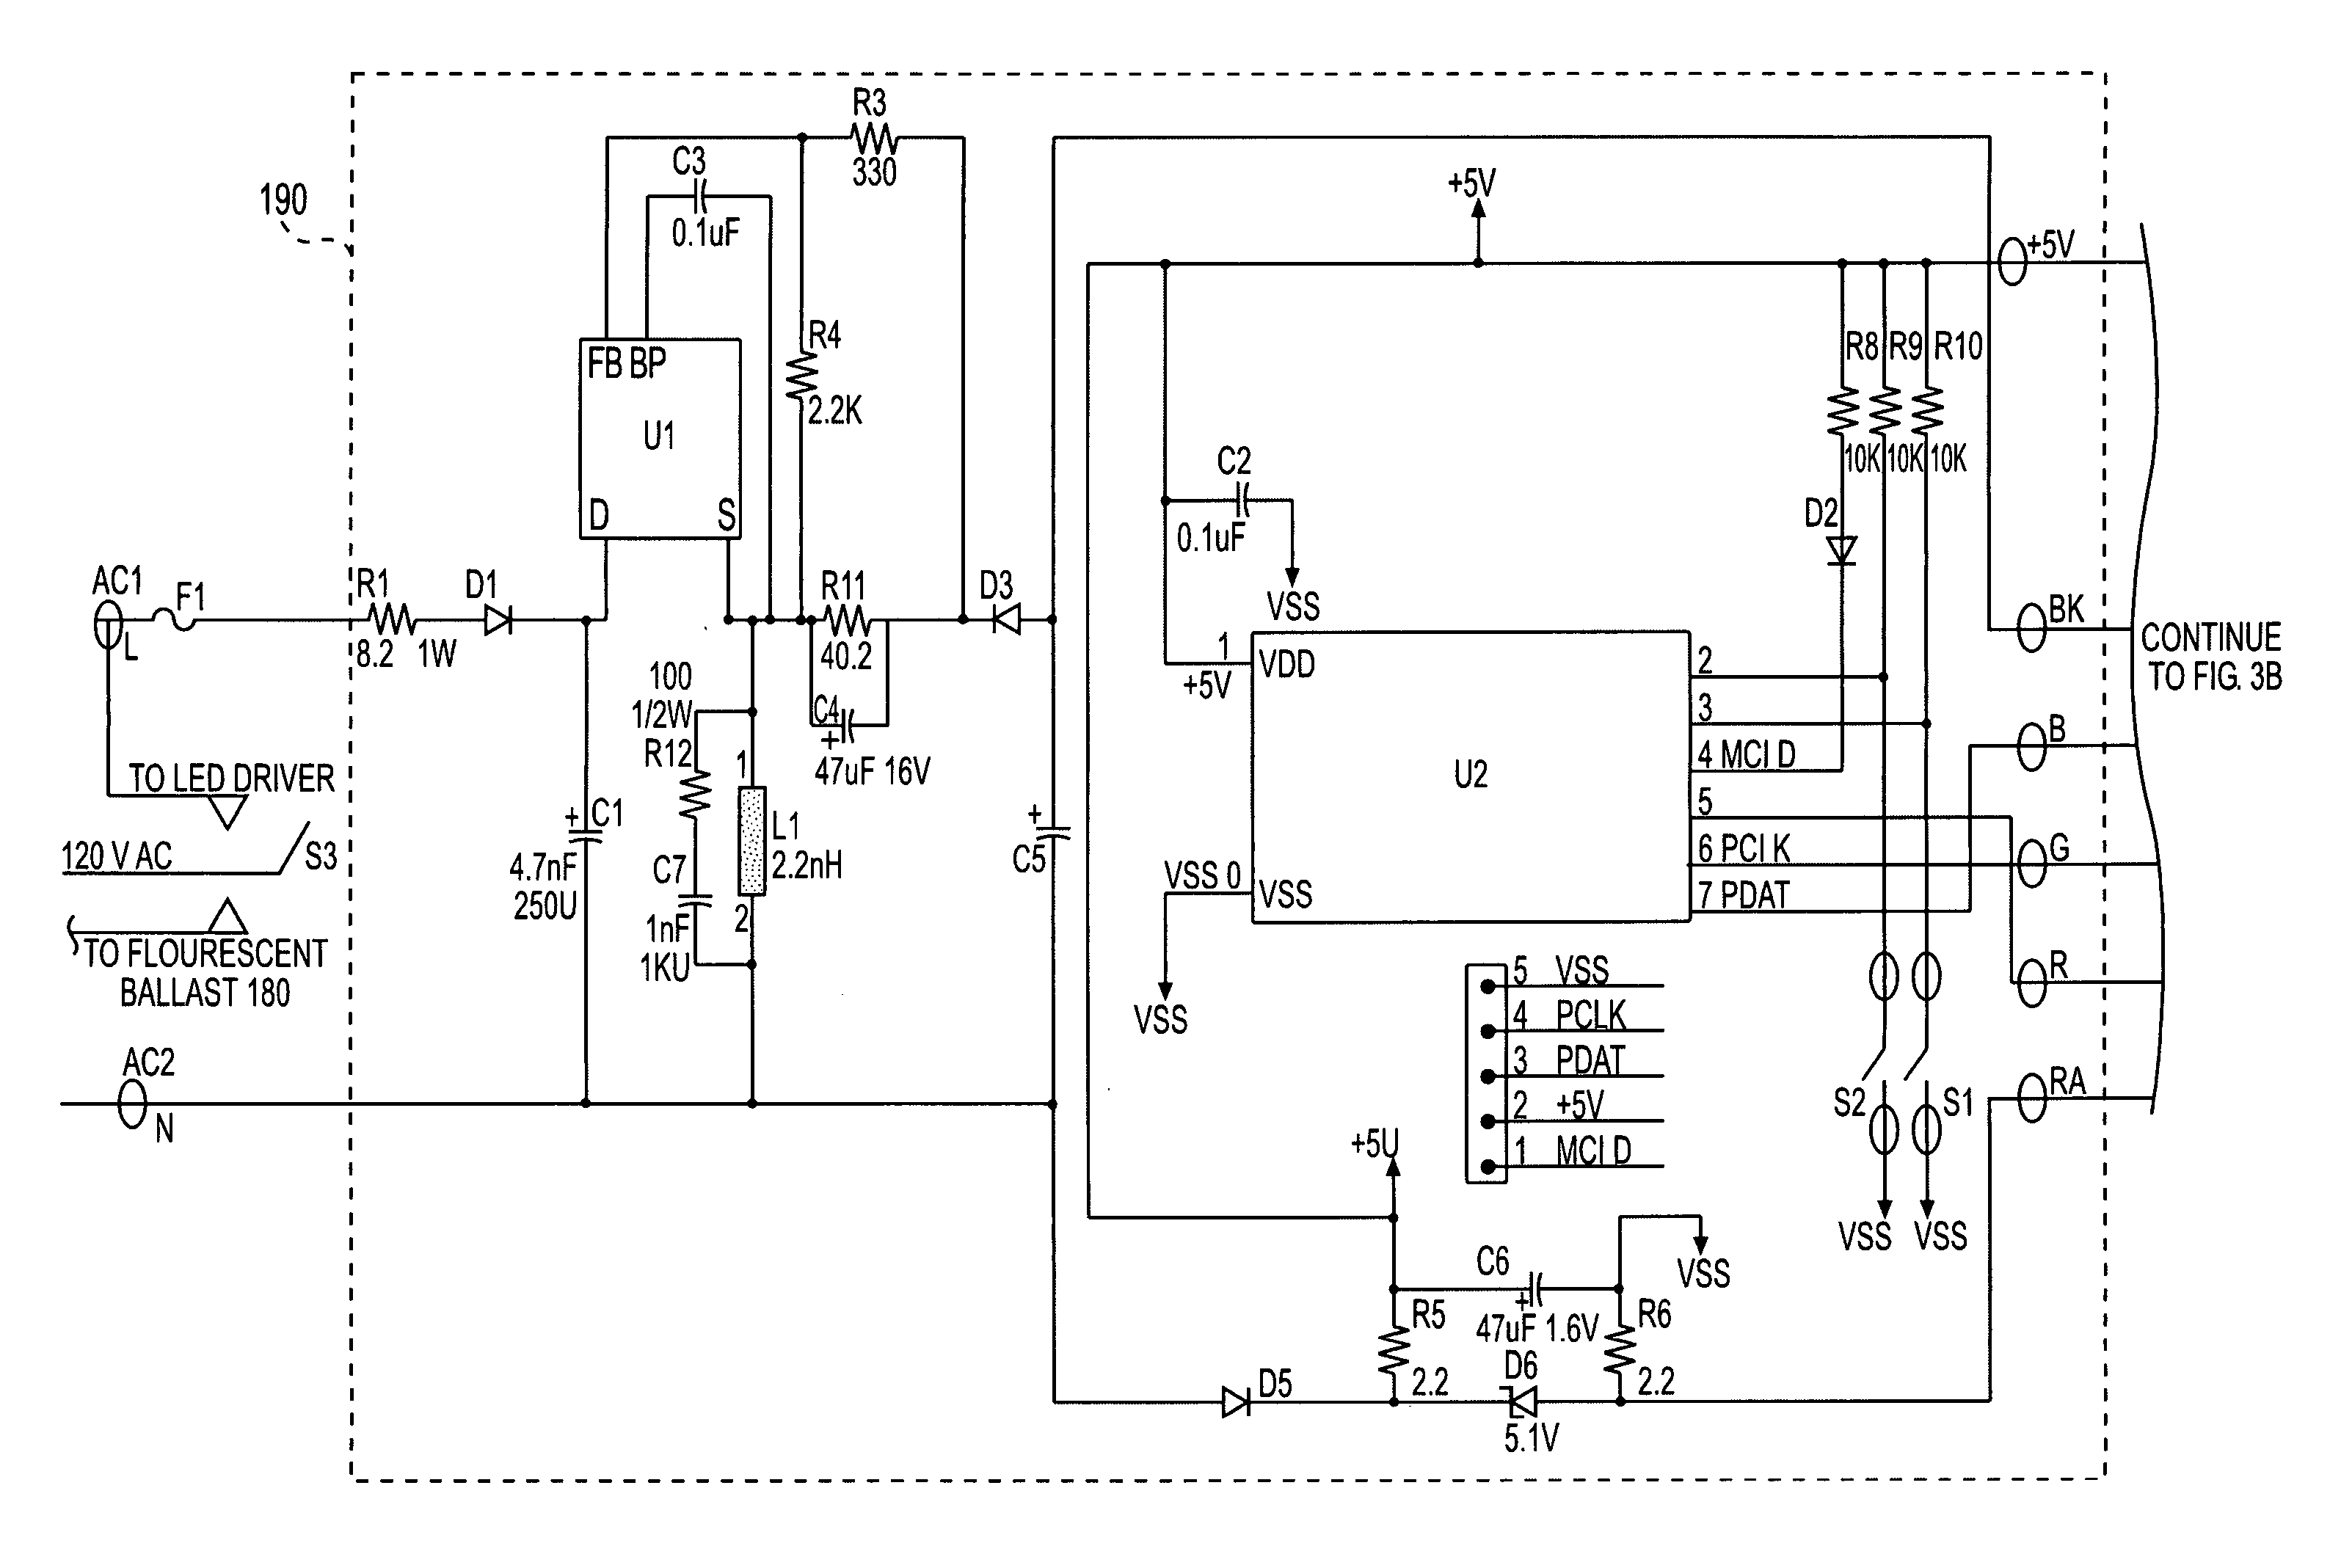 Lighting device having a circuit including a plurality of light emitting diodes, and methods of controlling and calibrating lighting devices